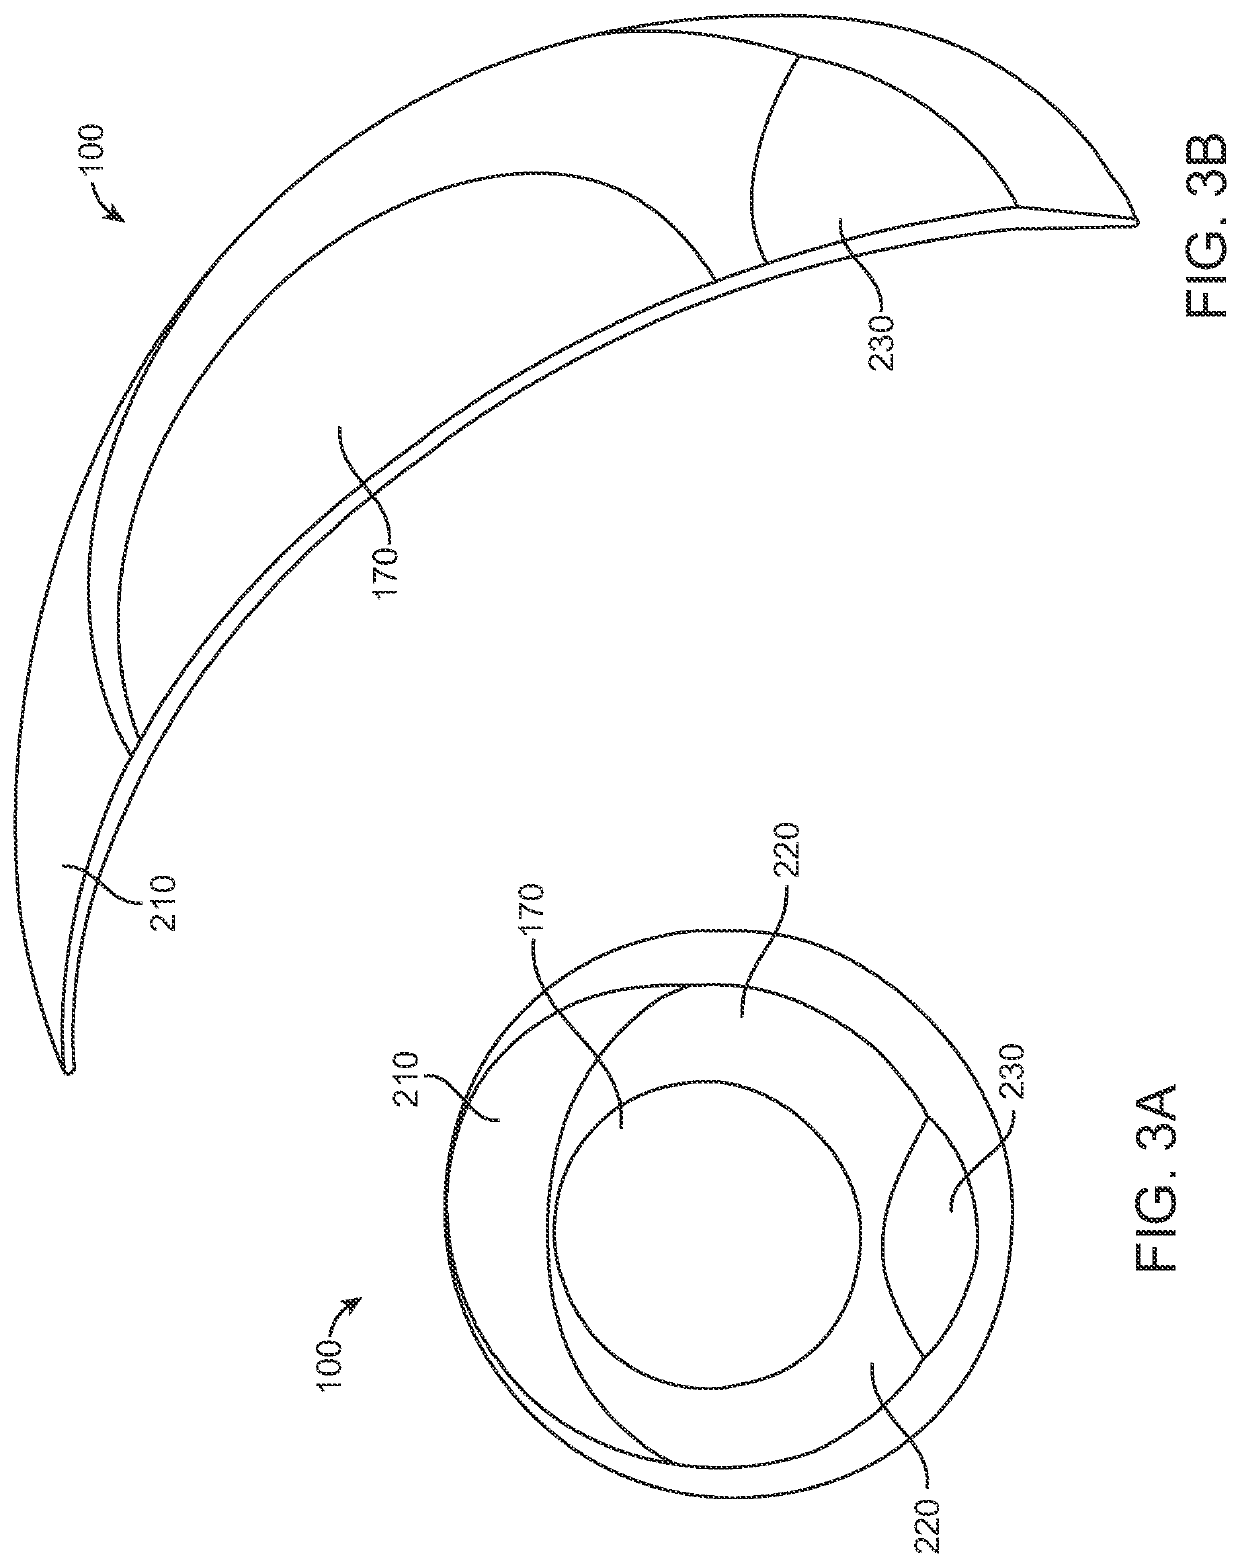 Rotationally stabilized contact lens